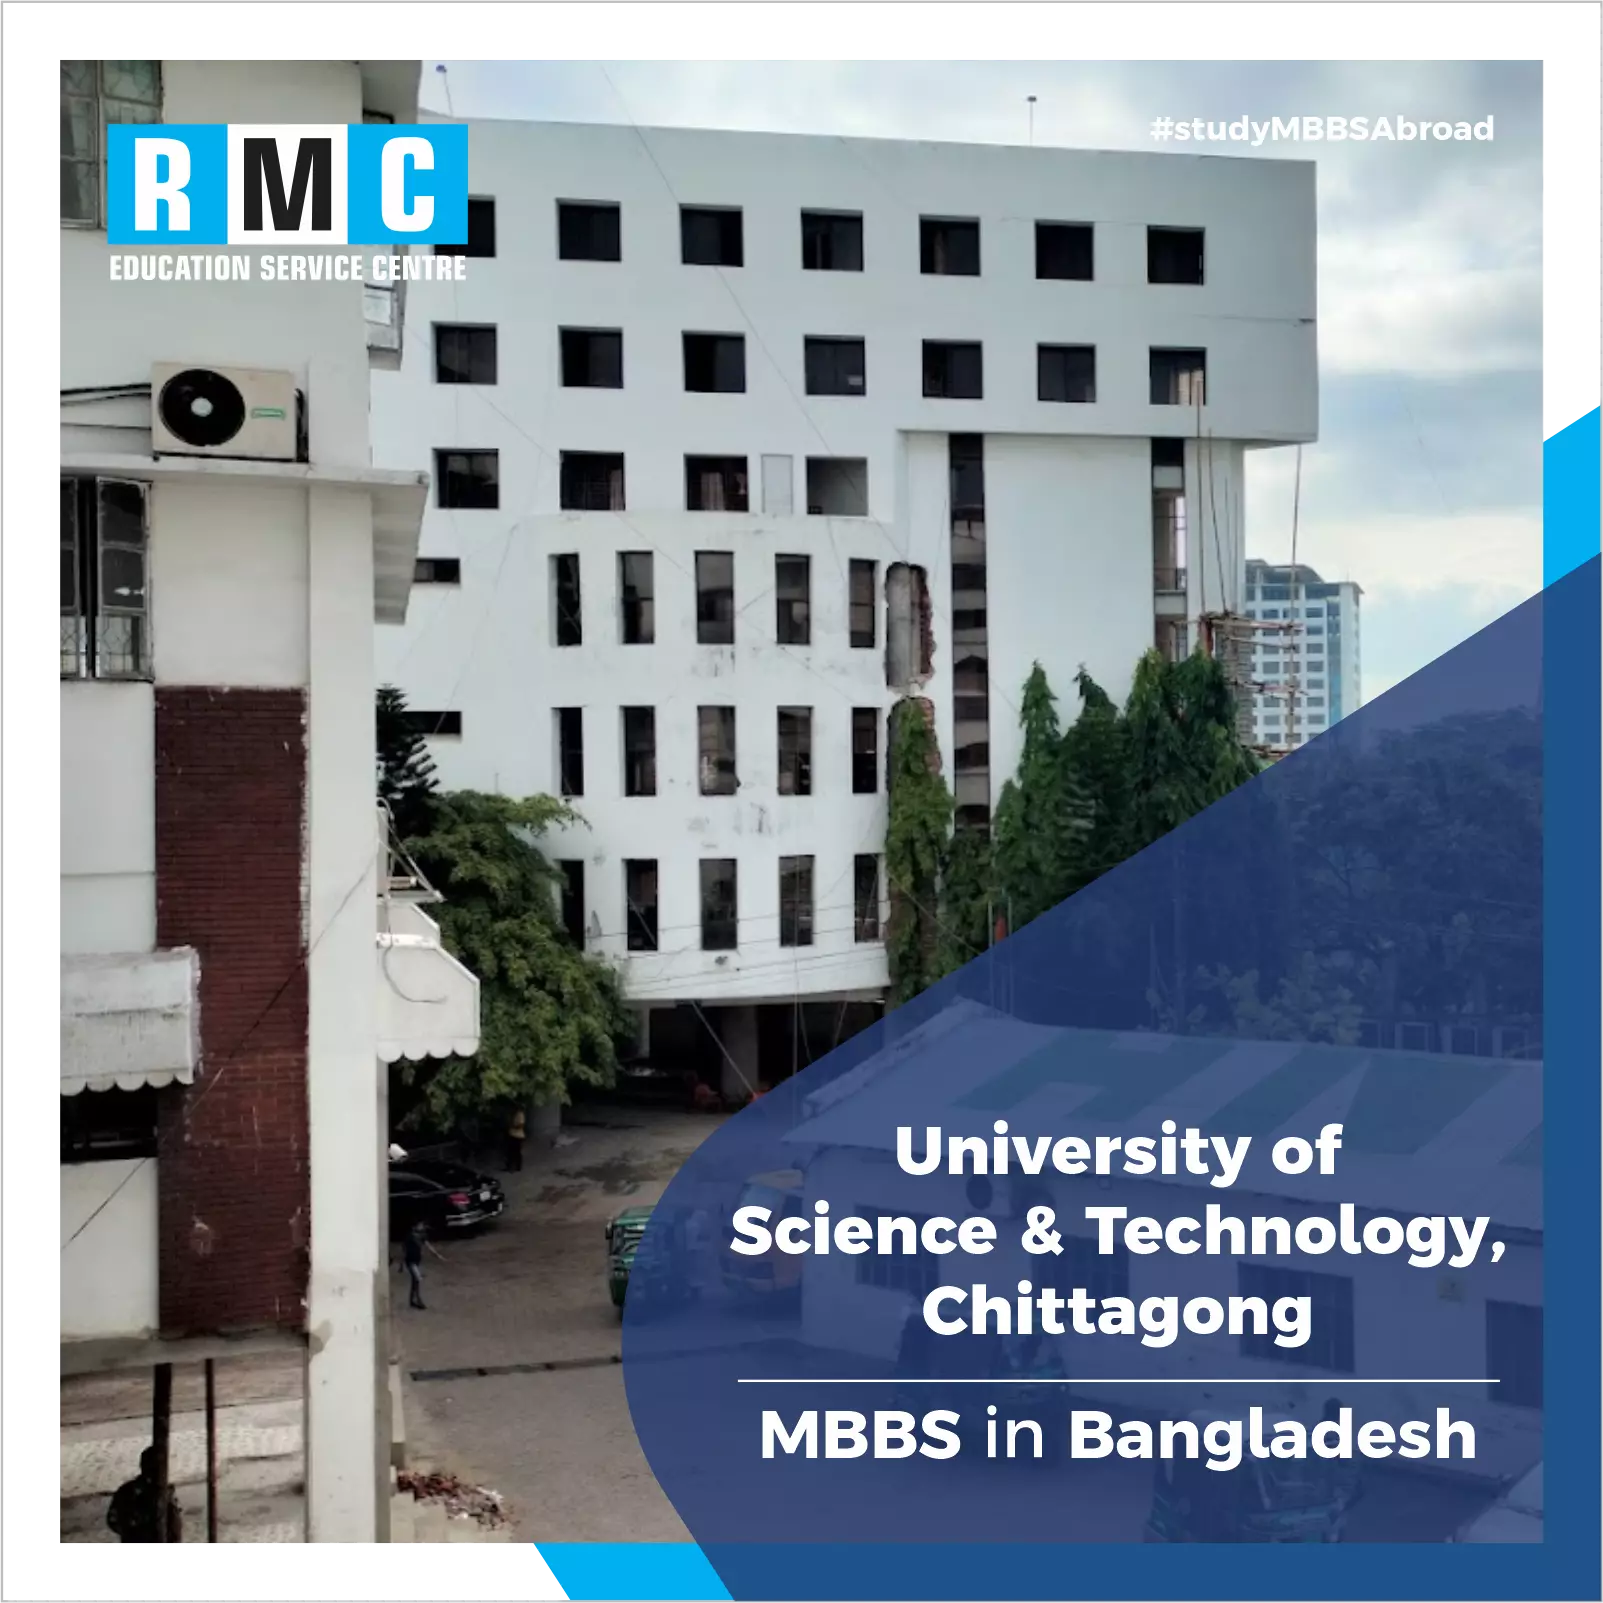 University of Science & Technology, Chittagong